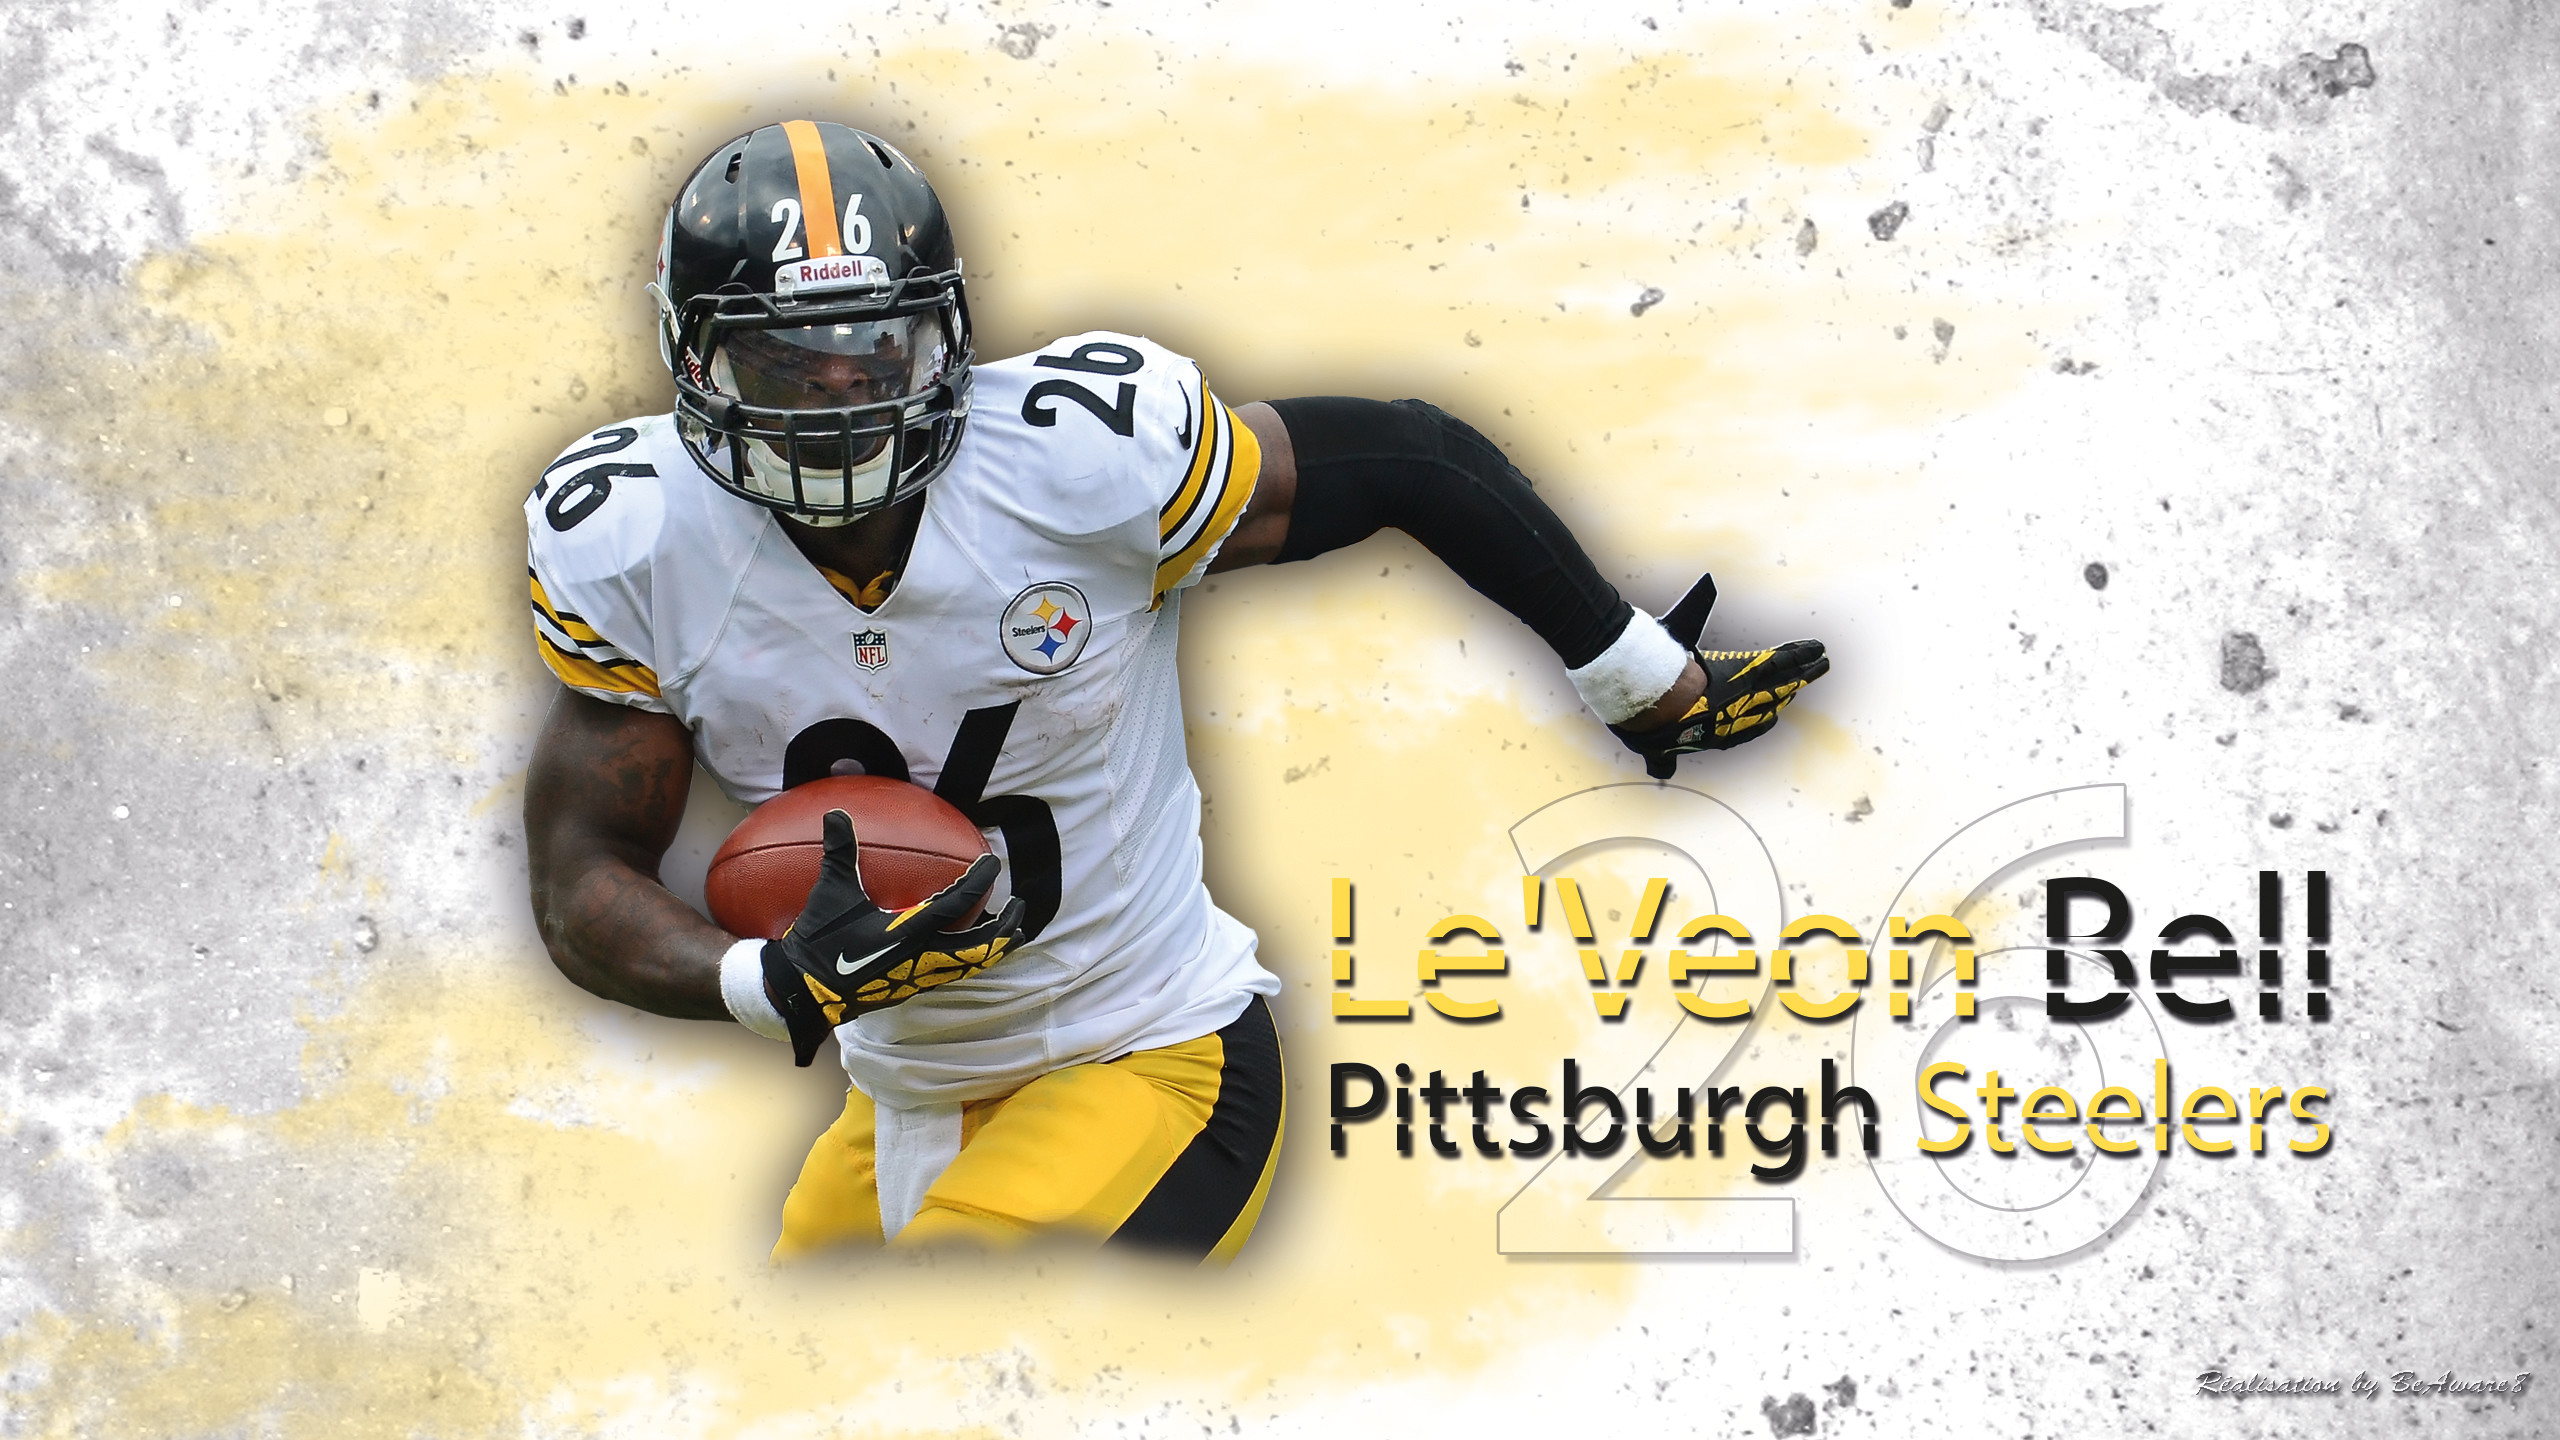 2560x1440 ... Pittsburgh Steelers Helmet Â· Attachment for Le Veon Bell Steelers  Wallpaper ...